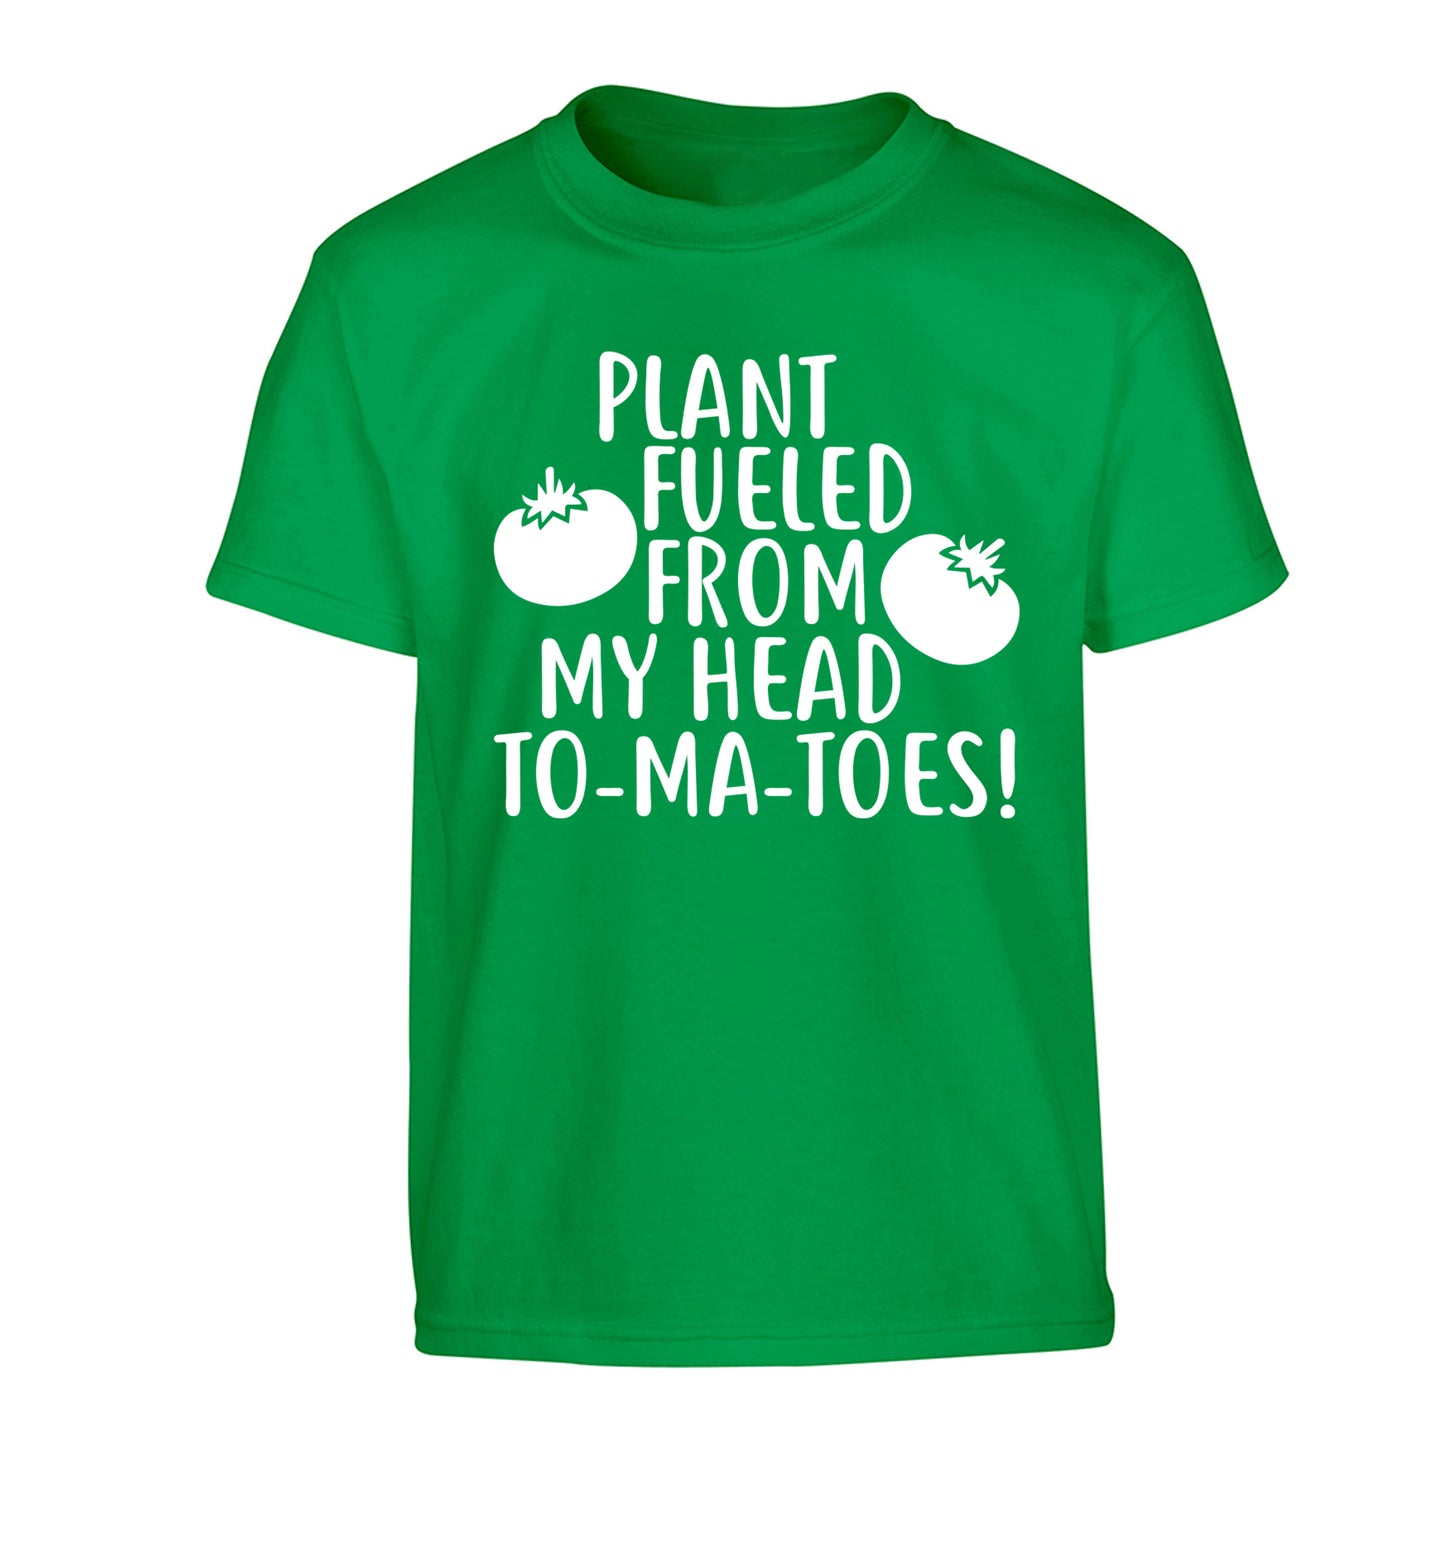 Plant fueled from my head to-ma-toes Children's green Tshirt 12-14 Years